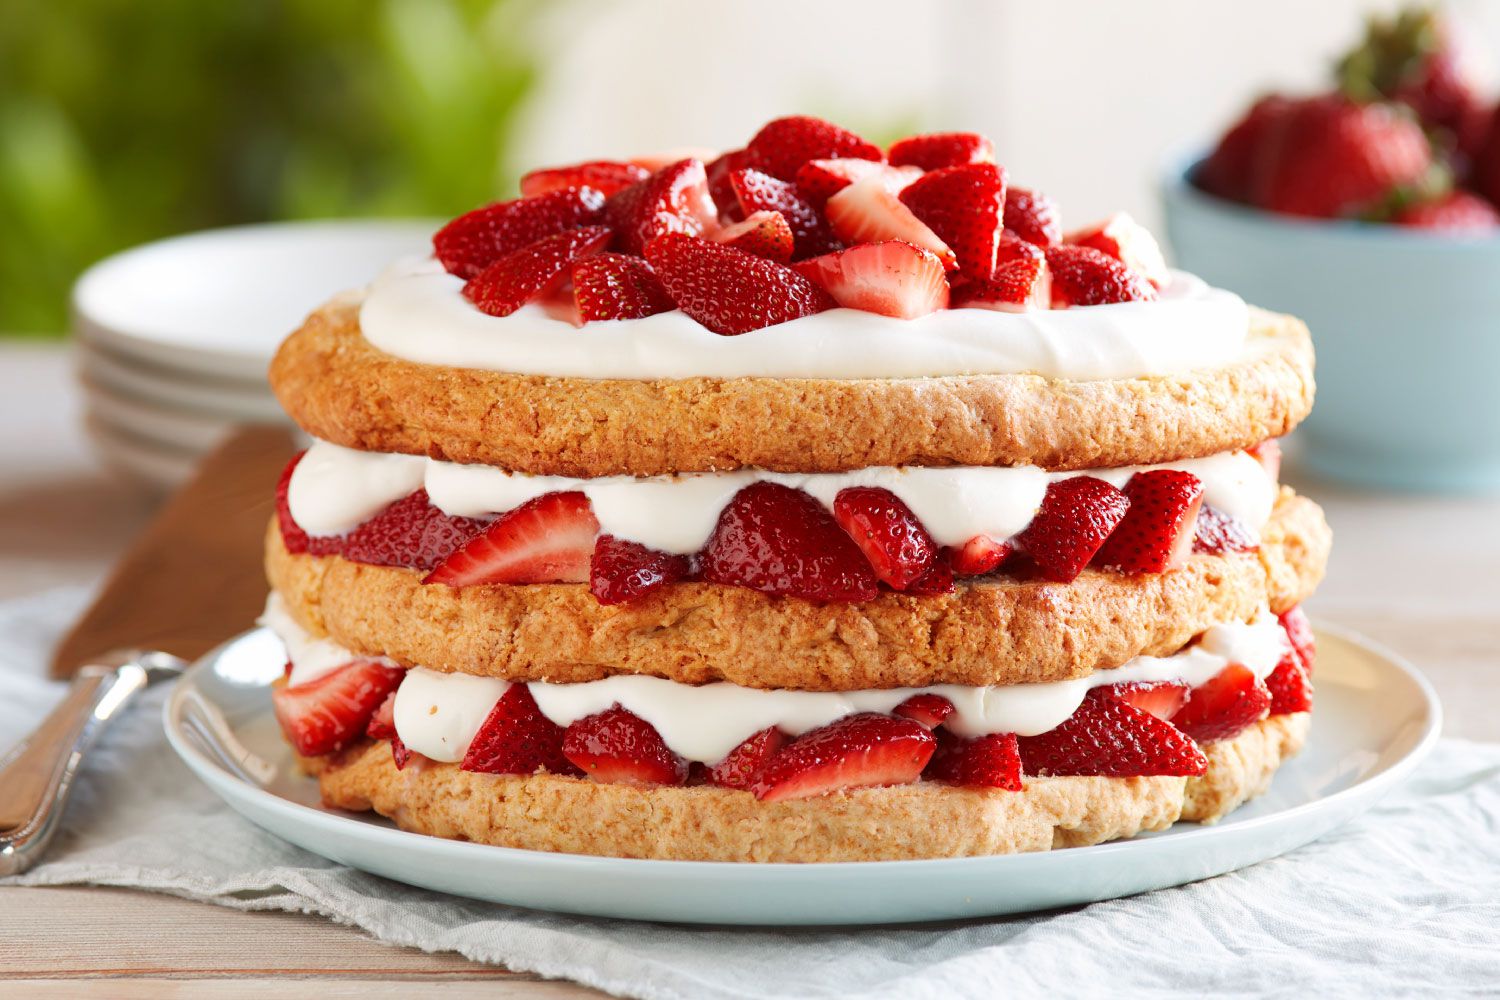 🍰 Only a Baked Good Connoisseur Will Have Eaten at Least 20/39 of These Foods Strawberry shortcake